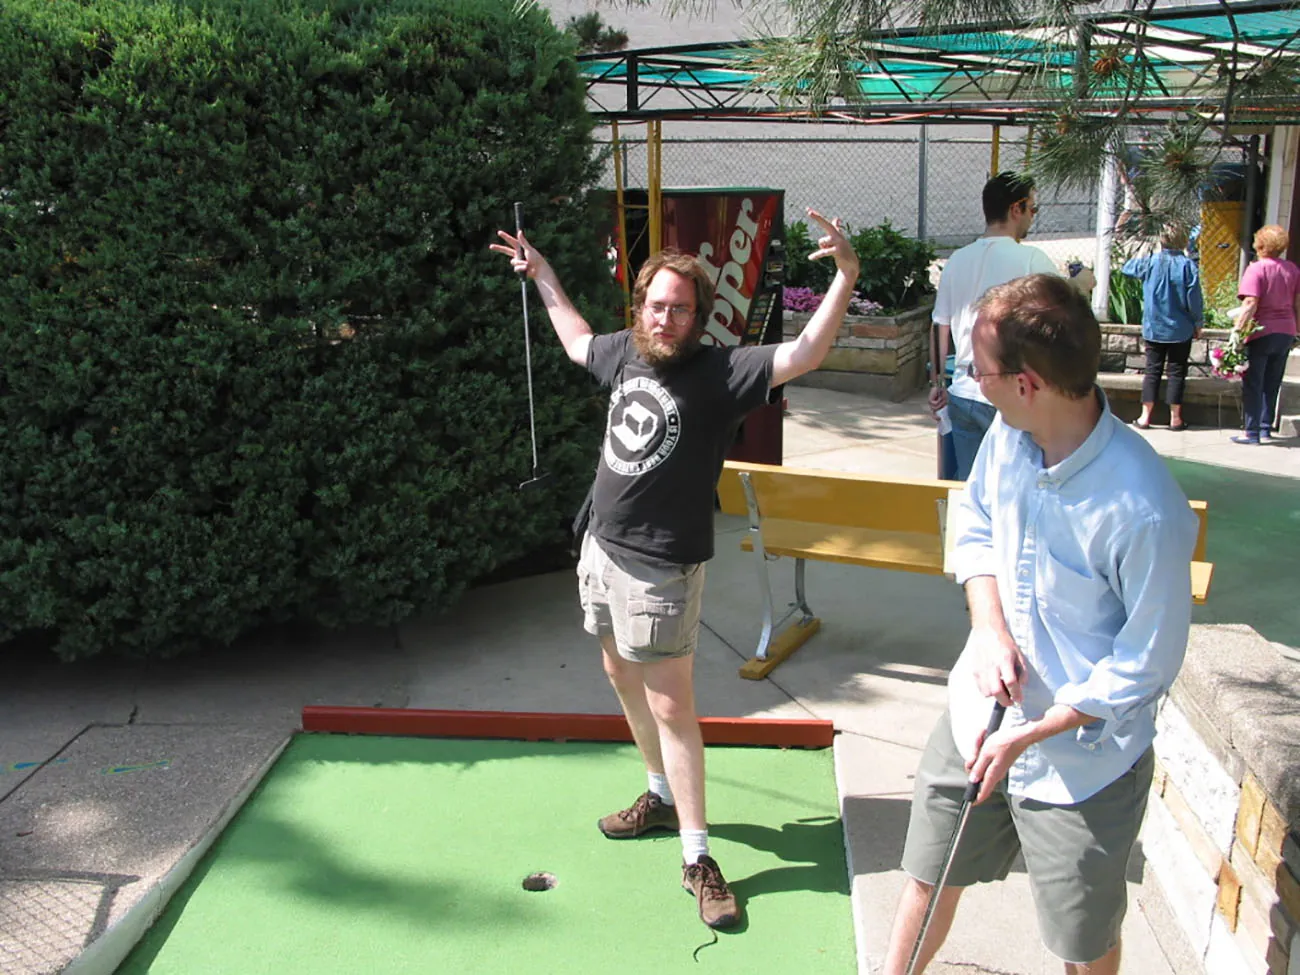 A photo shows a man in casual attire celebrating a hole in one on a miniature golf course, with an untied shoe.